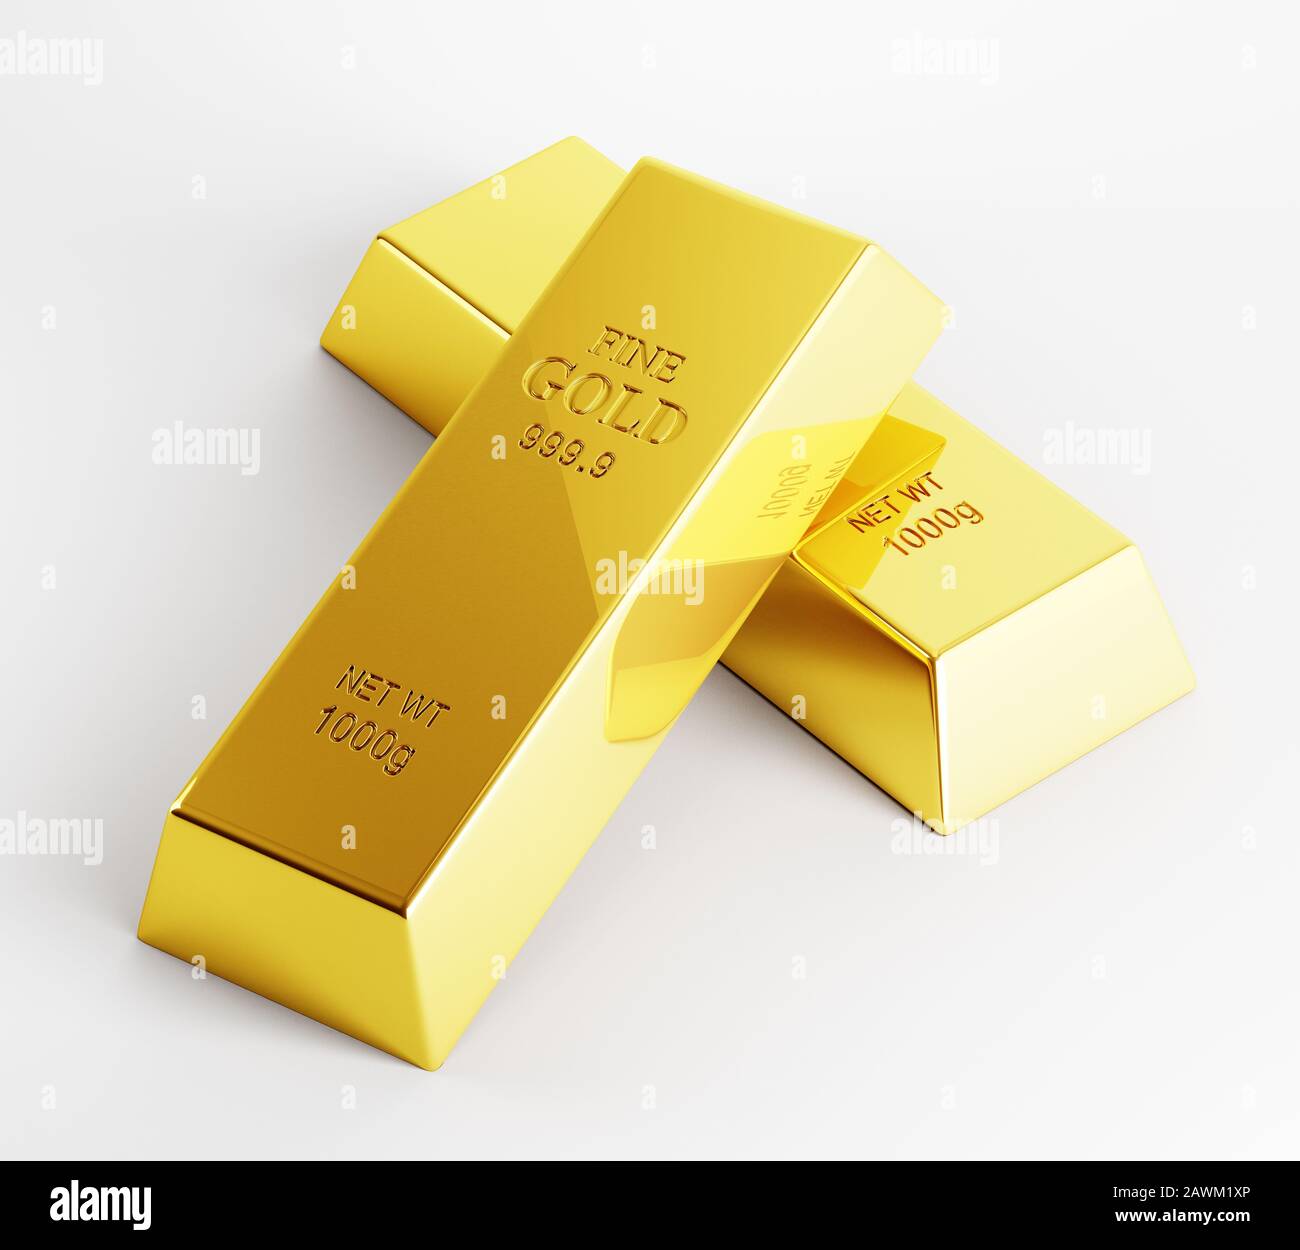 Shiny gold bars isolated on white. Gold is the best investment asset, which price is always rising. Financial and business background wealth concept Stock Photo